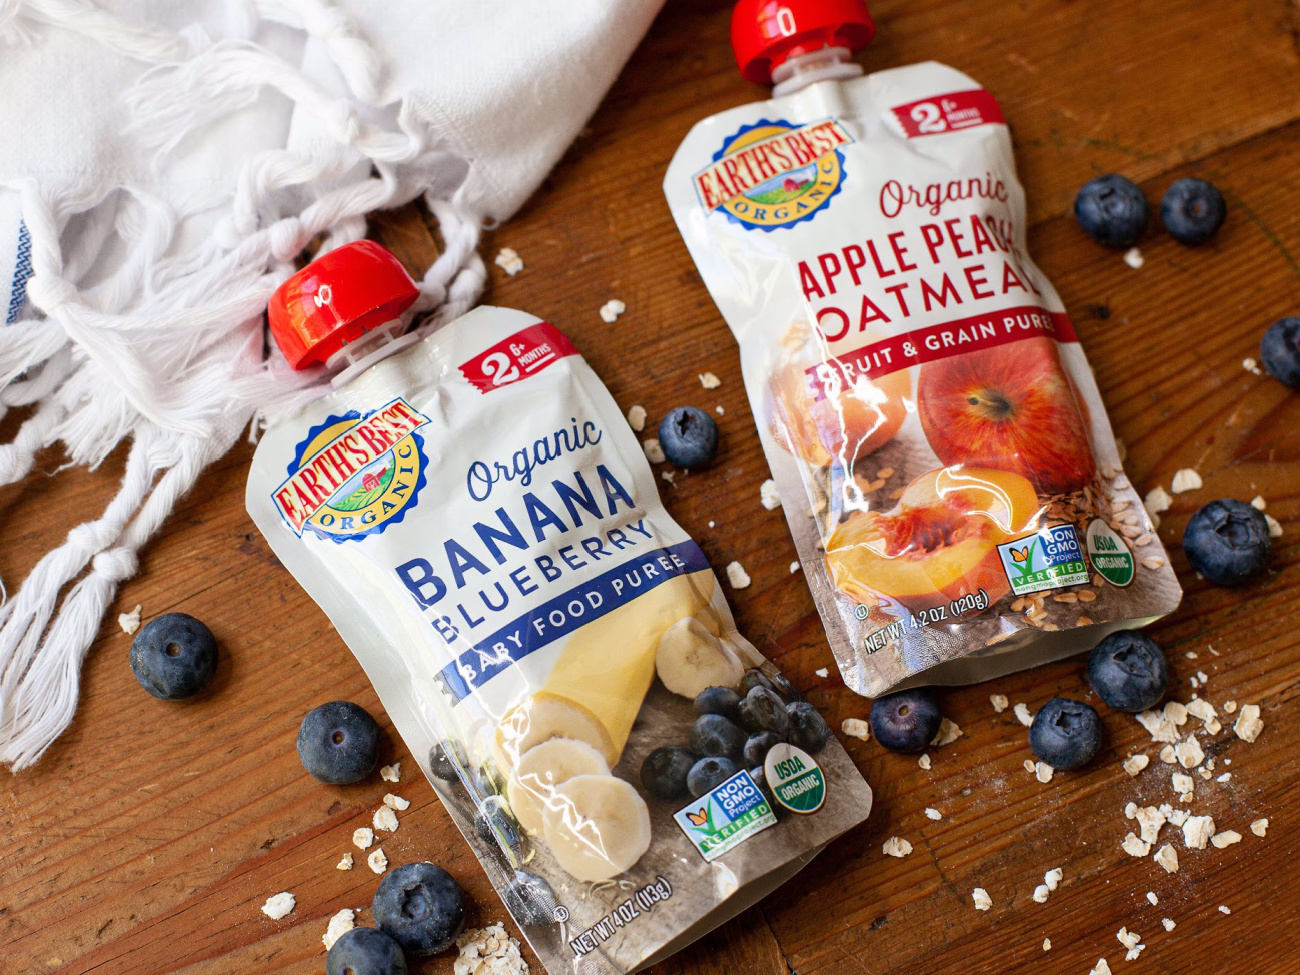 Earth’s Best Organic Baby Food As Low As 86¢ Per Pouch At Publix